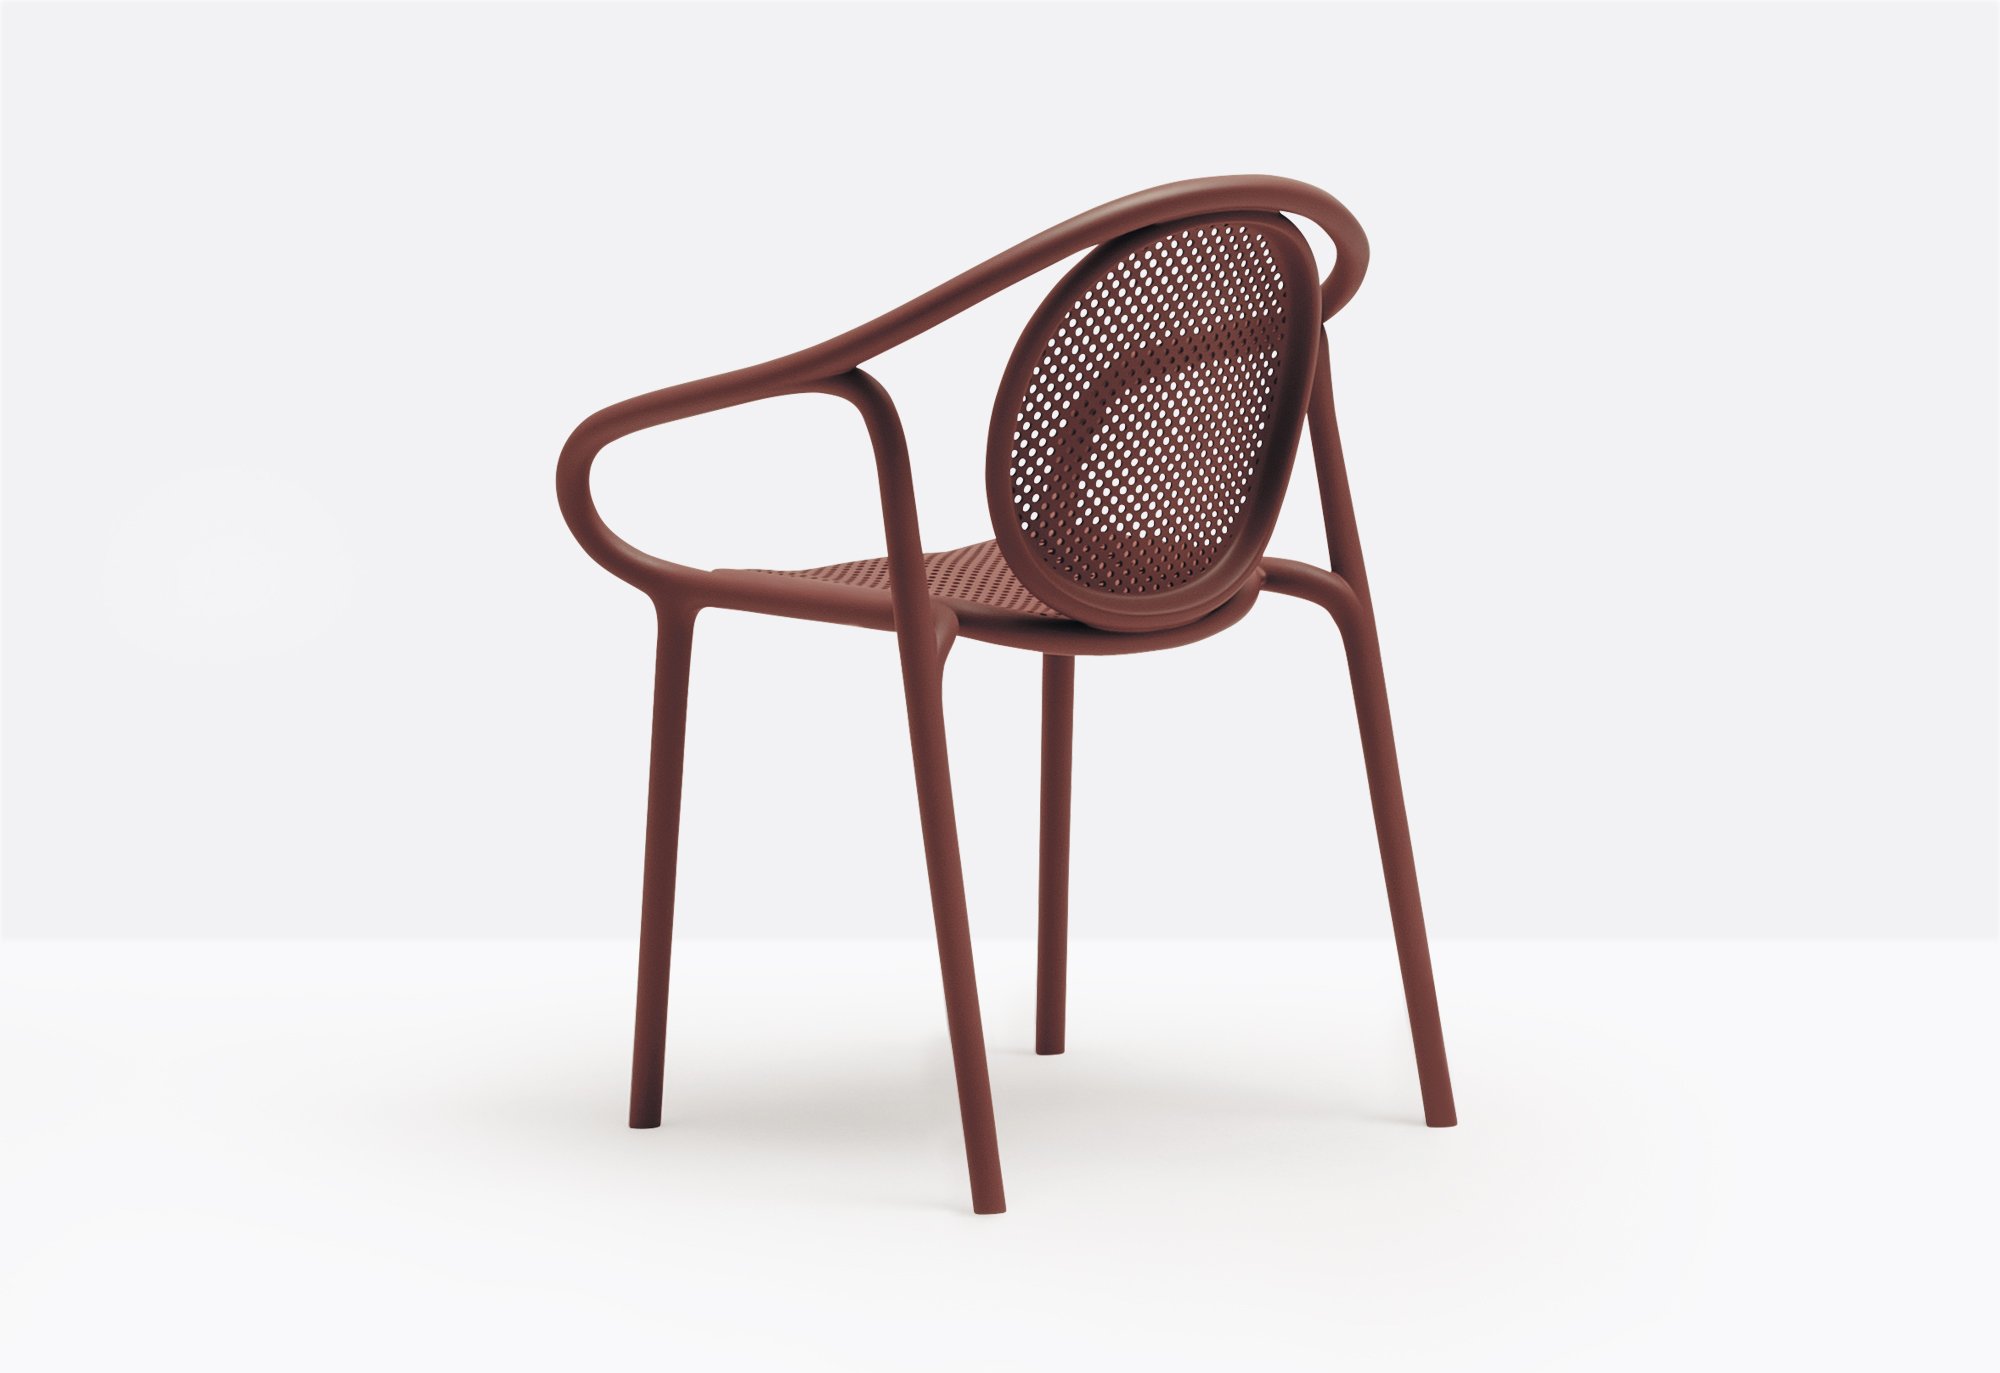 Remind Chair from Pedrali, designed by Eugeni Quitllet